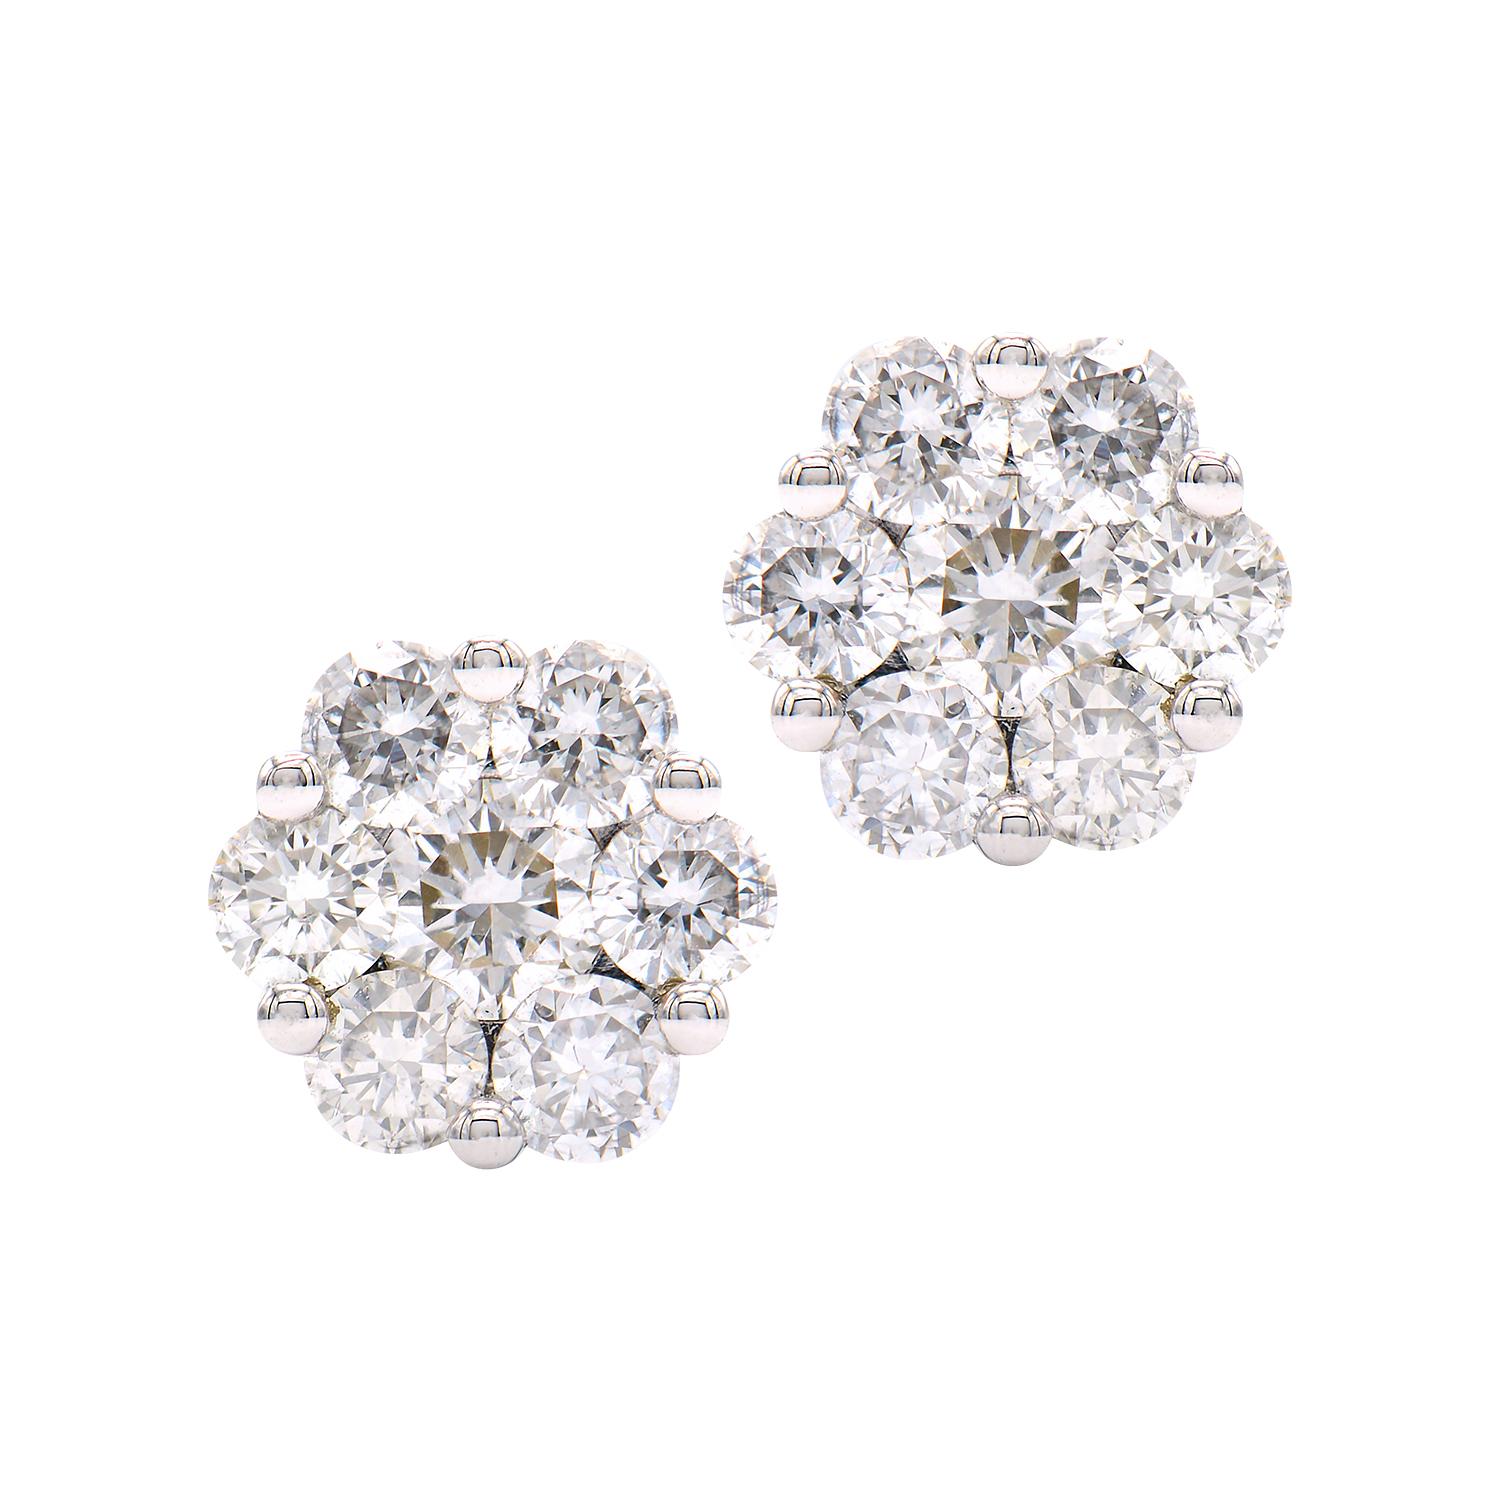 These beautiful diamond cluster earrings are made from 1.4 grams of 14k white gold. There are 2 larger diamonds in the centers that total 0.15 carats and they are surrounded by 12 smaller diamonds totaling 0.44 carats. These earrings have a post and